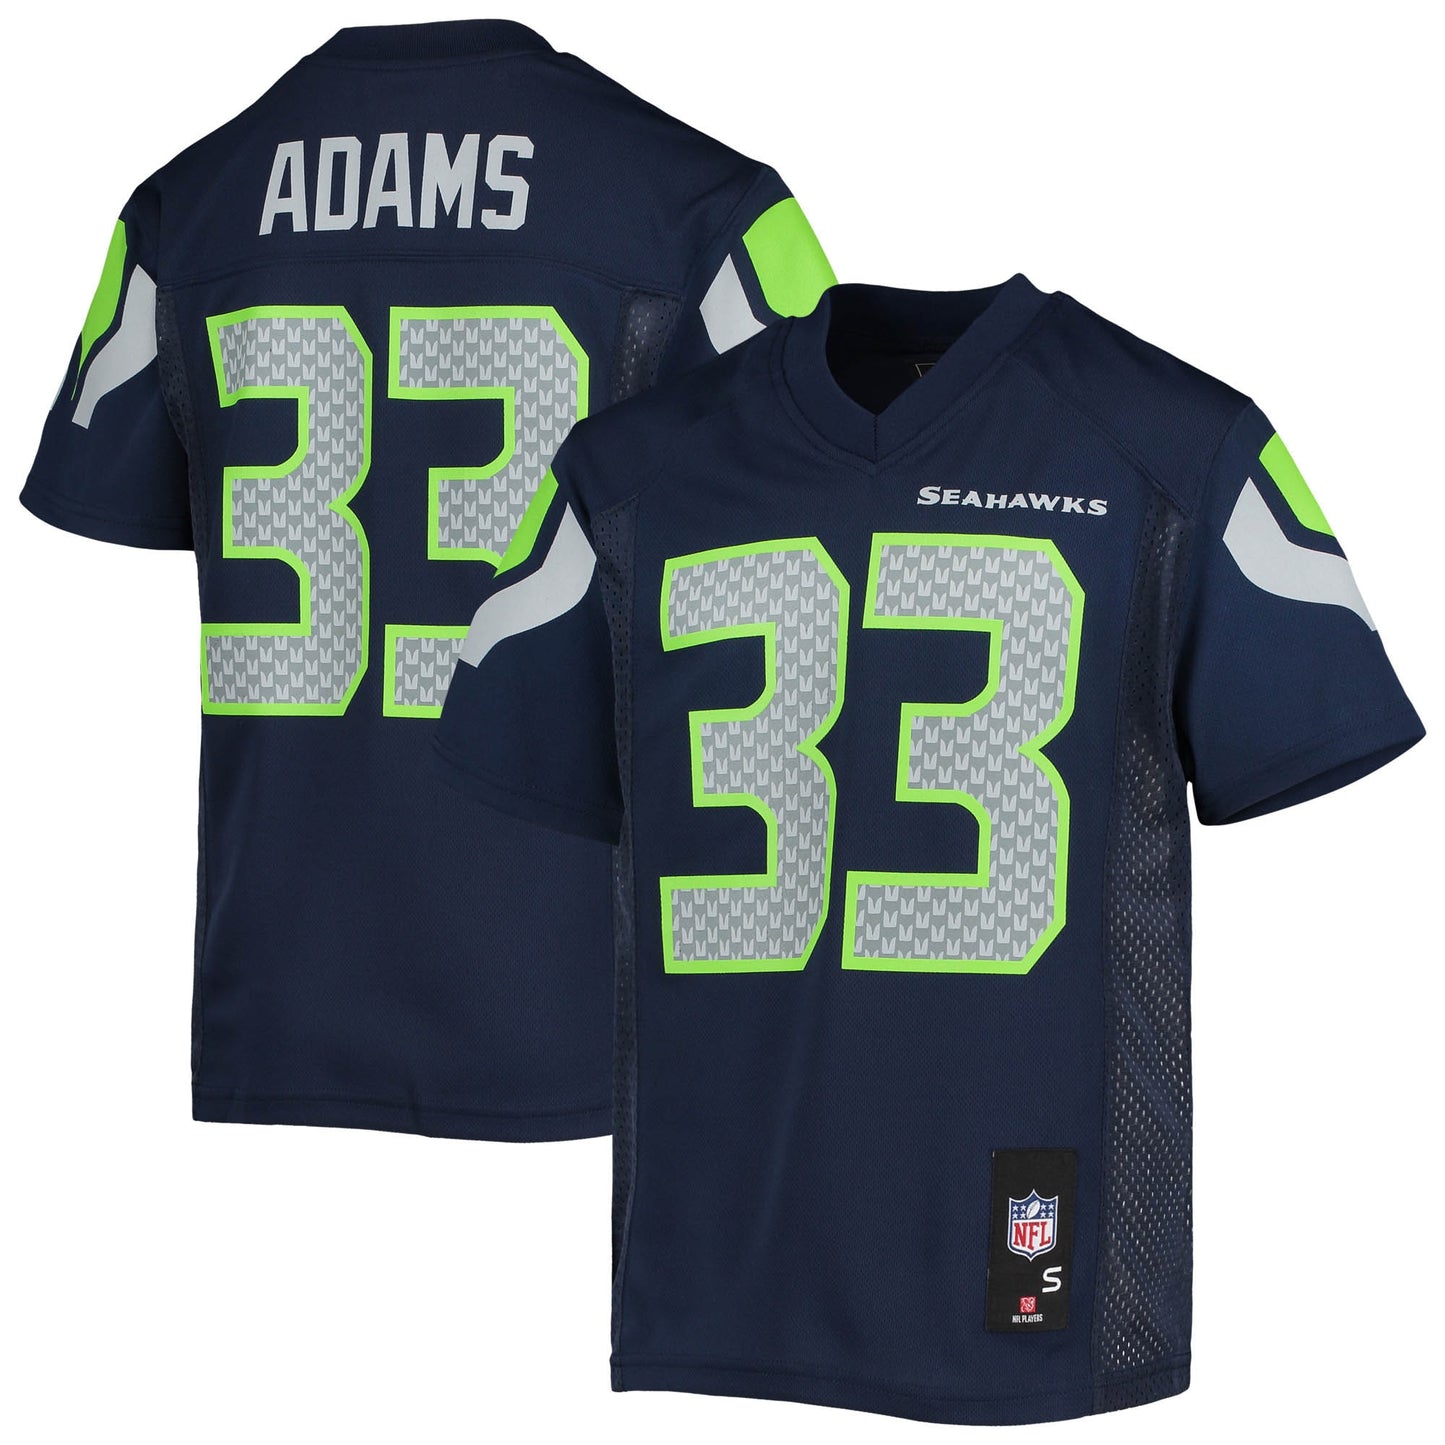 Jamal Adams Seattle Seahawks Youth Replica Player Jersey - College Navy